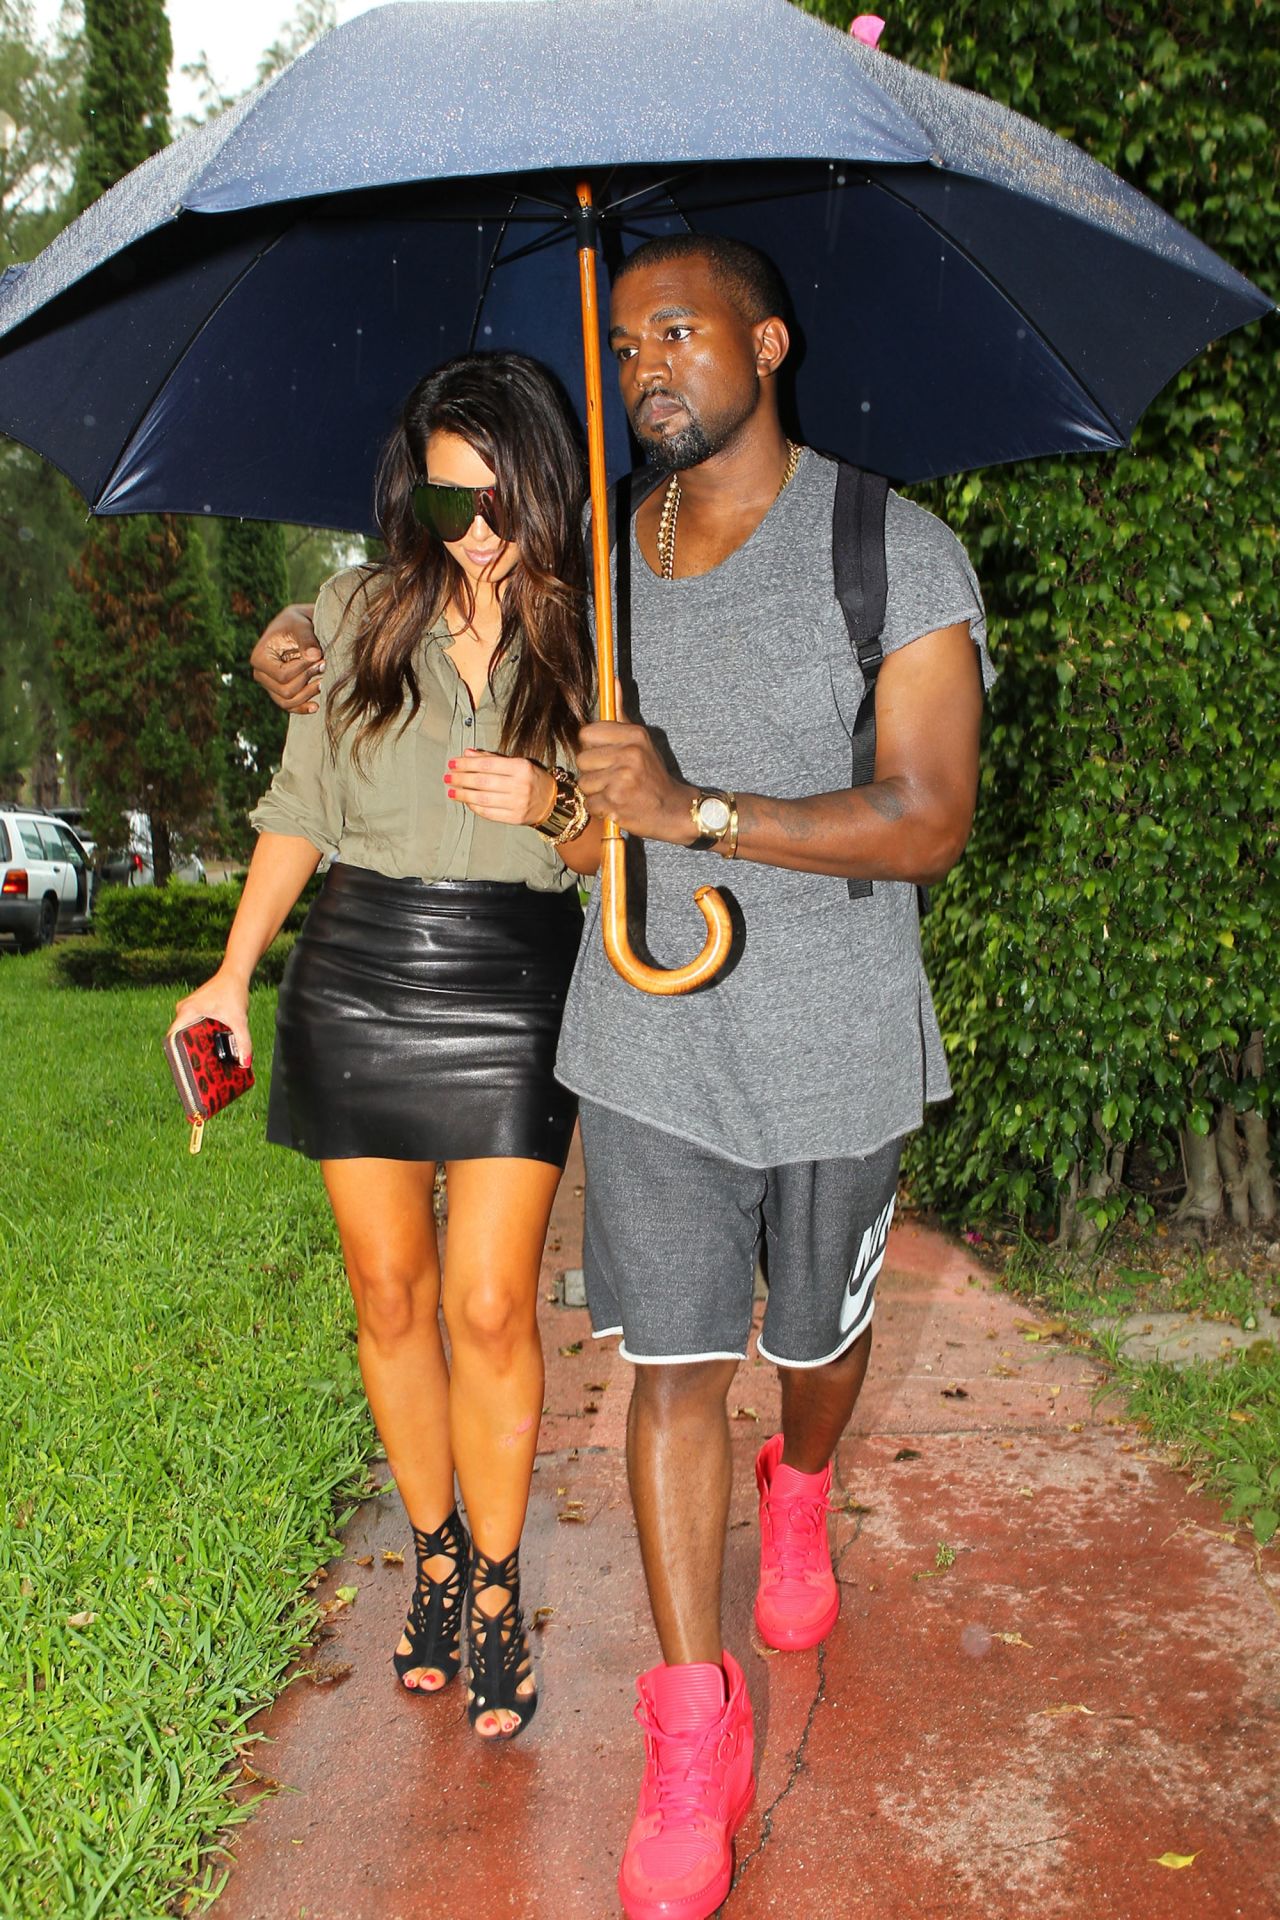 When Kim and Kanye took a romantic, rainy stroll in Miami in October 2012, everything seemed PG at first ... 